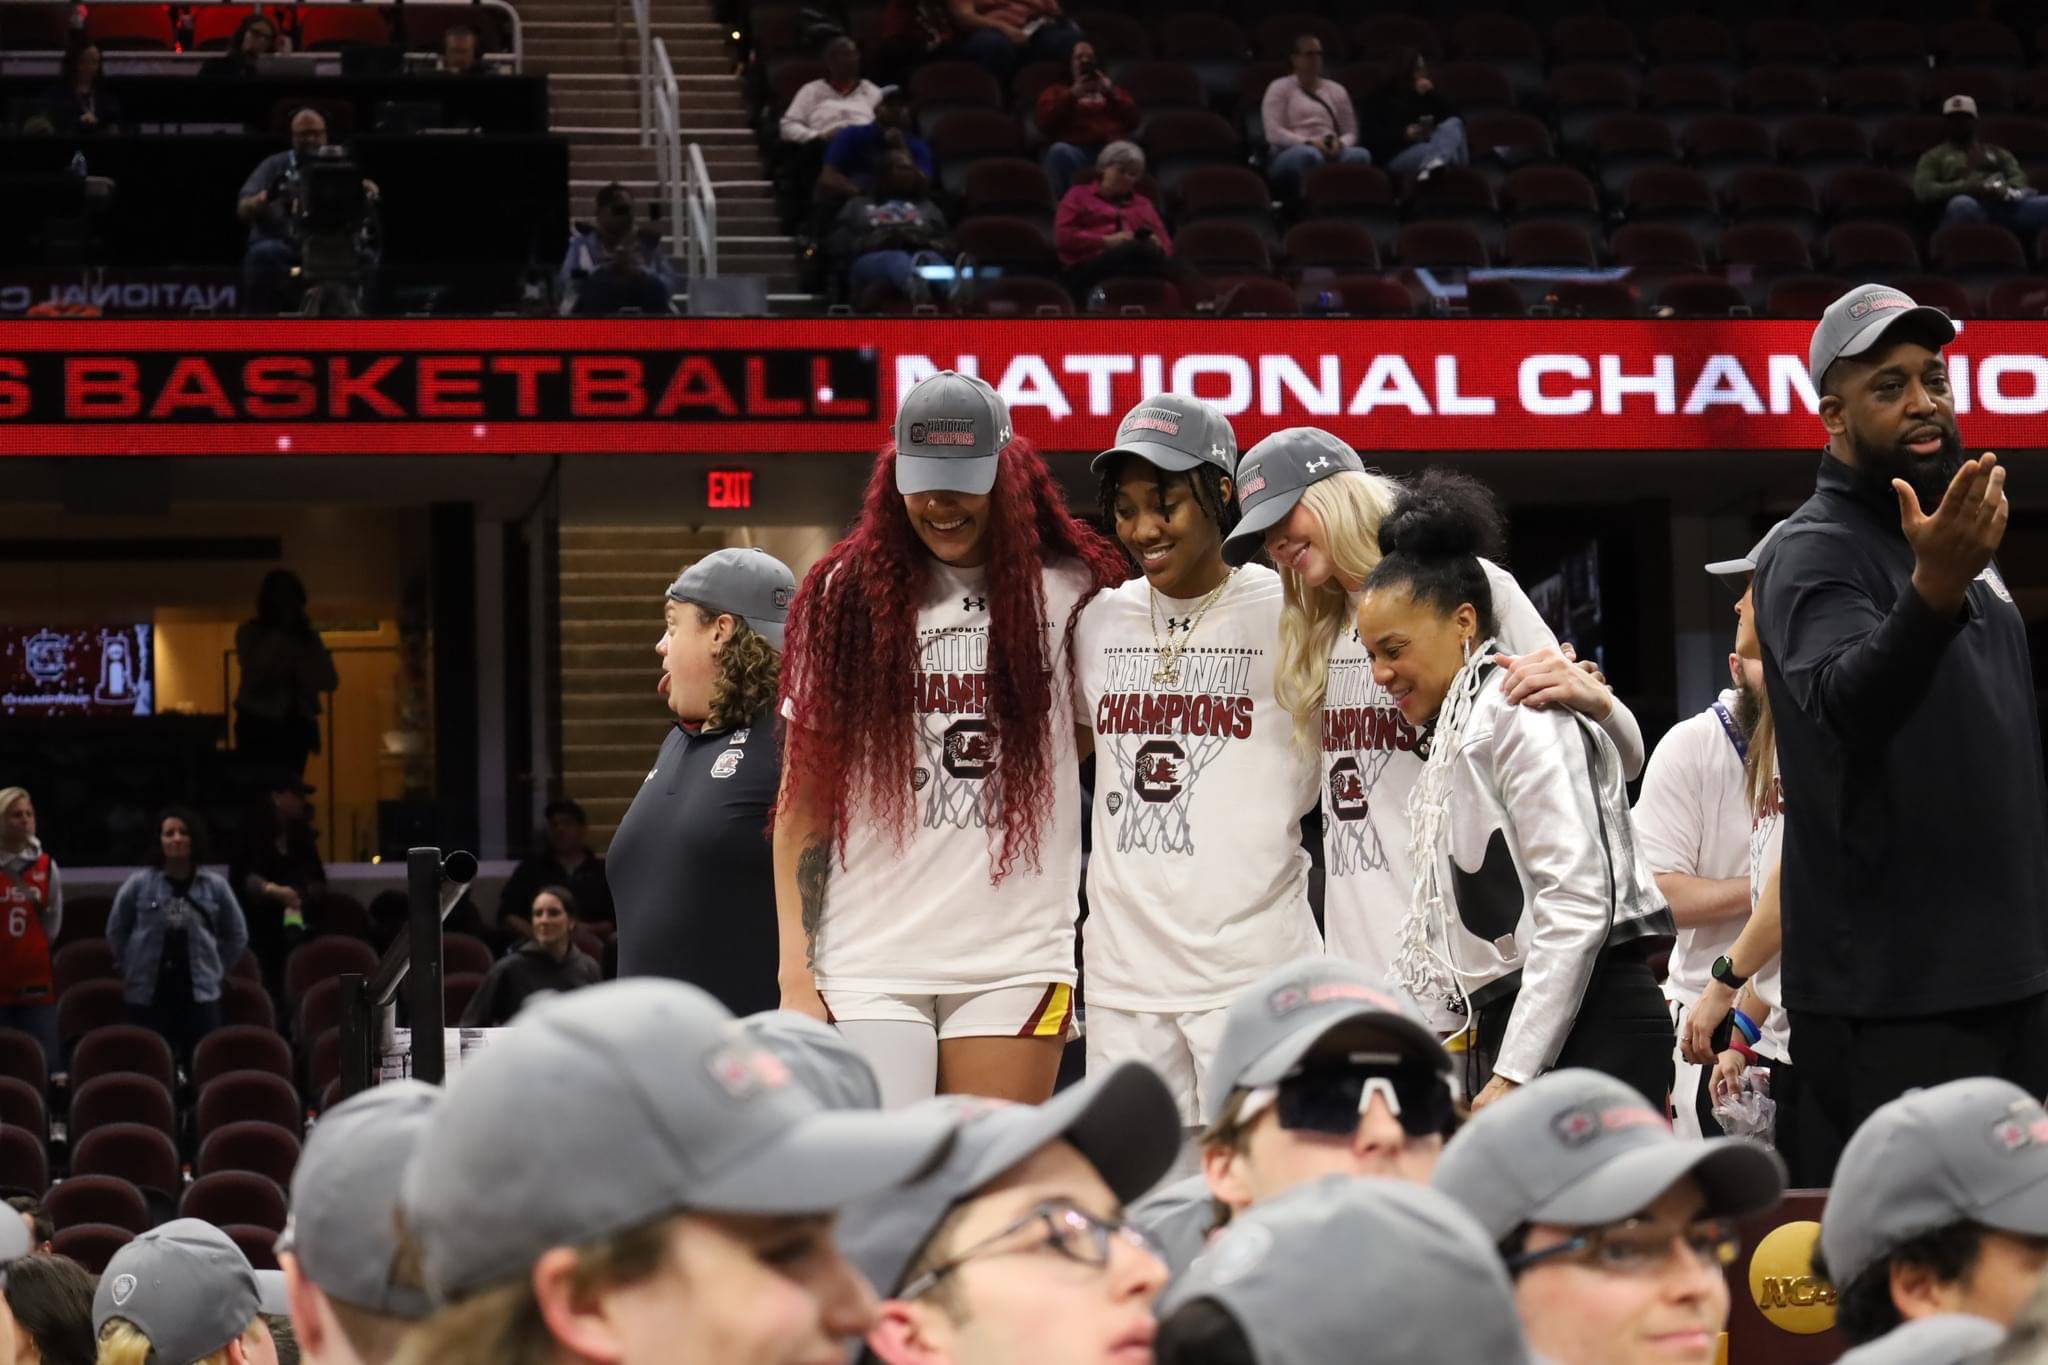 Defense Wins Games: How the Undefeated South Carolina Women’s Basketball Team Proved This Statement True